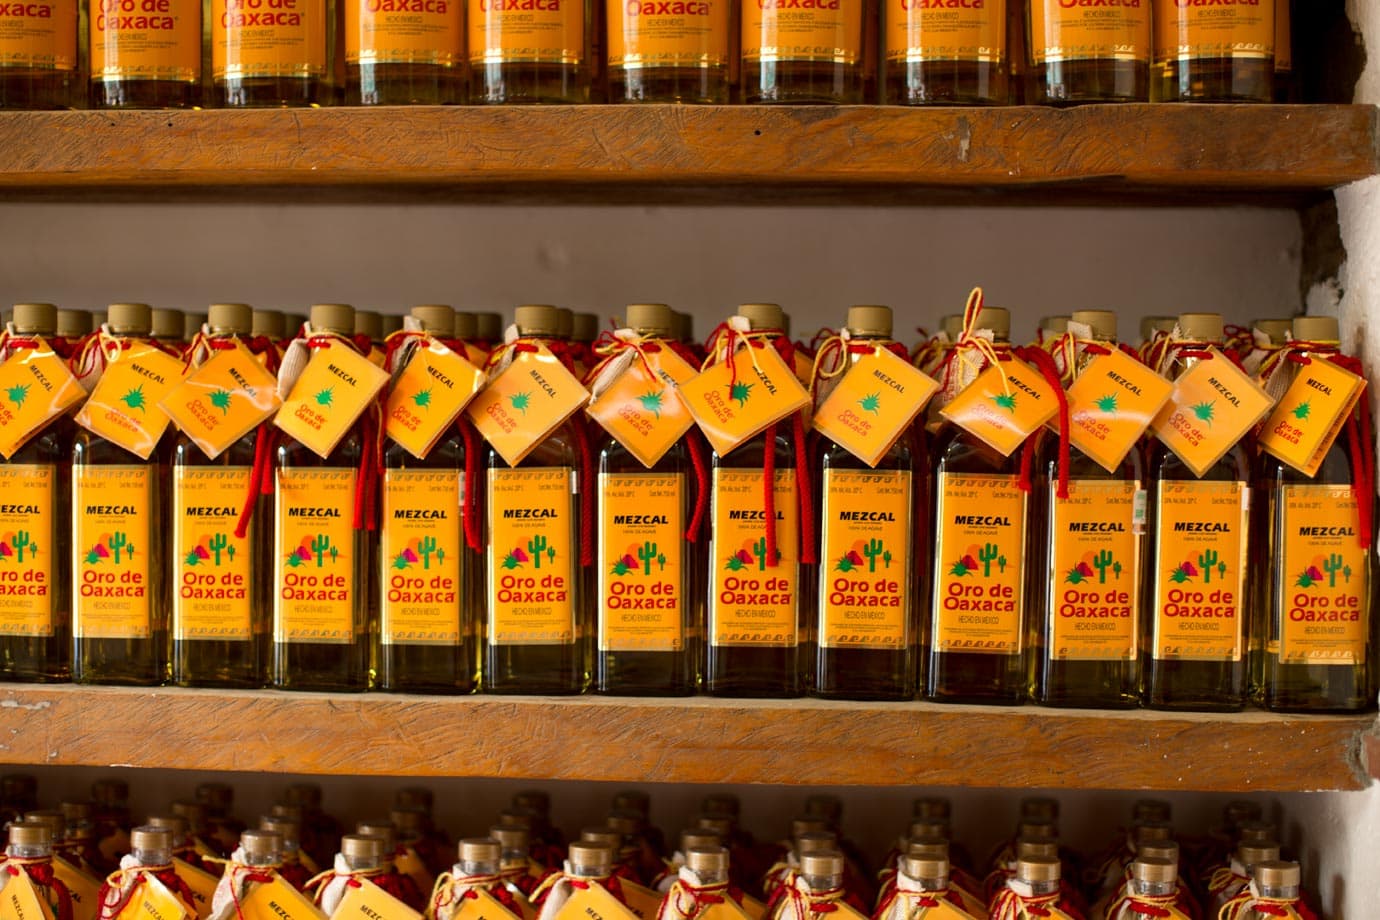 Mezcal is the spirit distilled in Oaxaca and it is always a local favourite